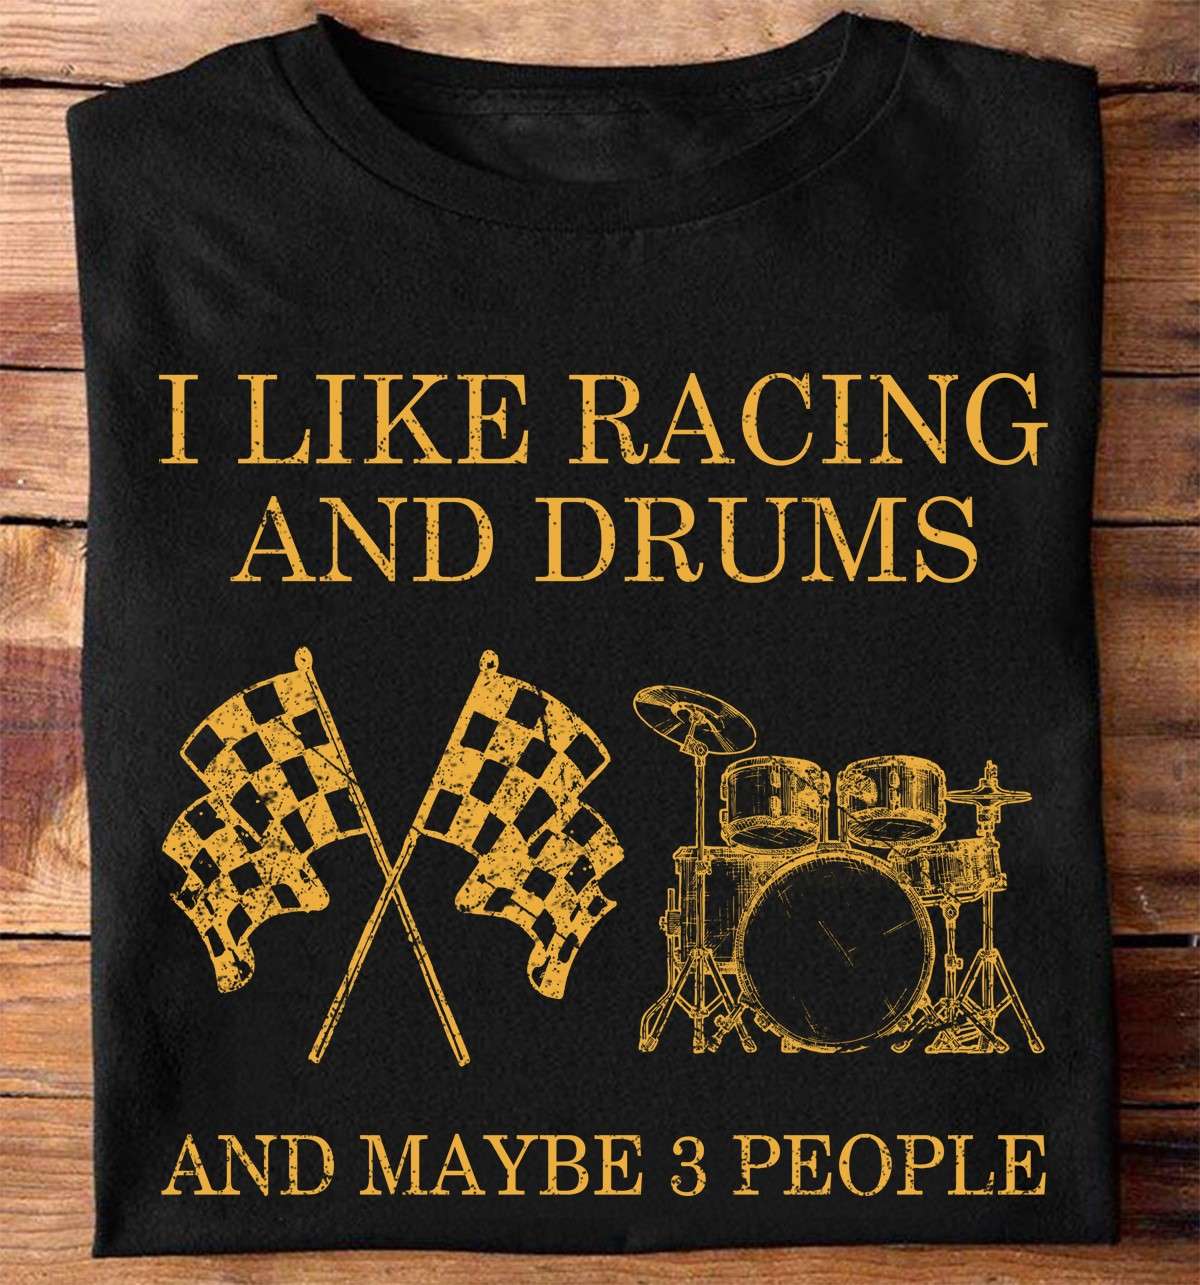 Racing Flag Drums - I like racing and drums and maybe 3 people